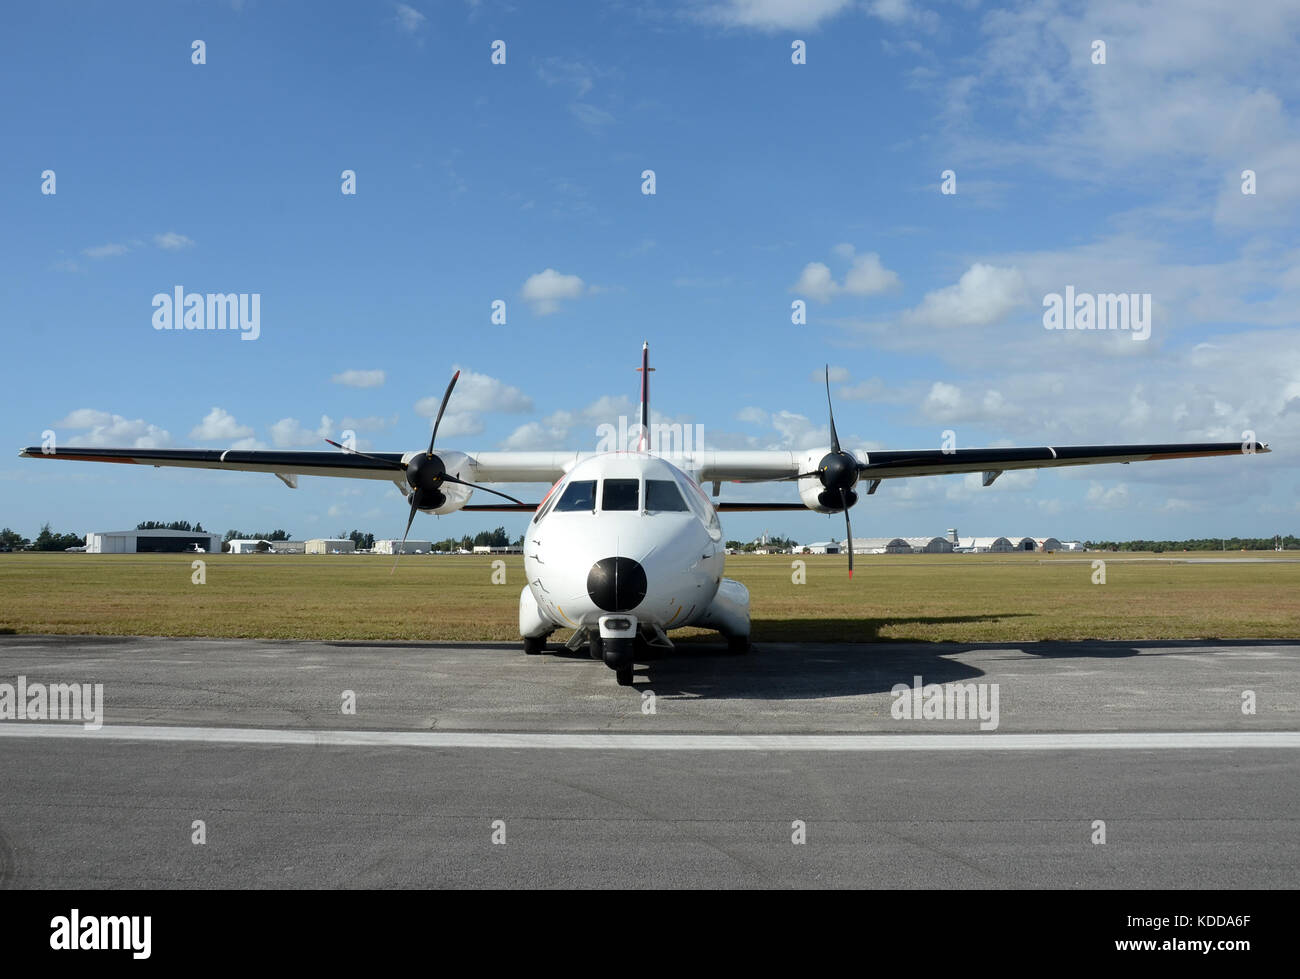 Modern turboprop airplane on the ground front view Stock Photo